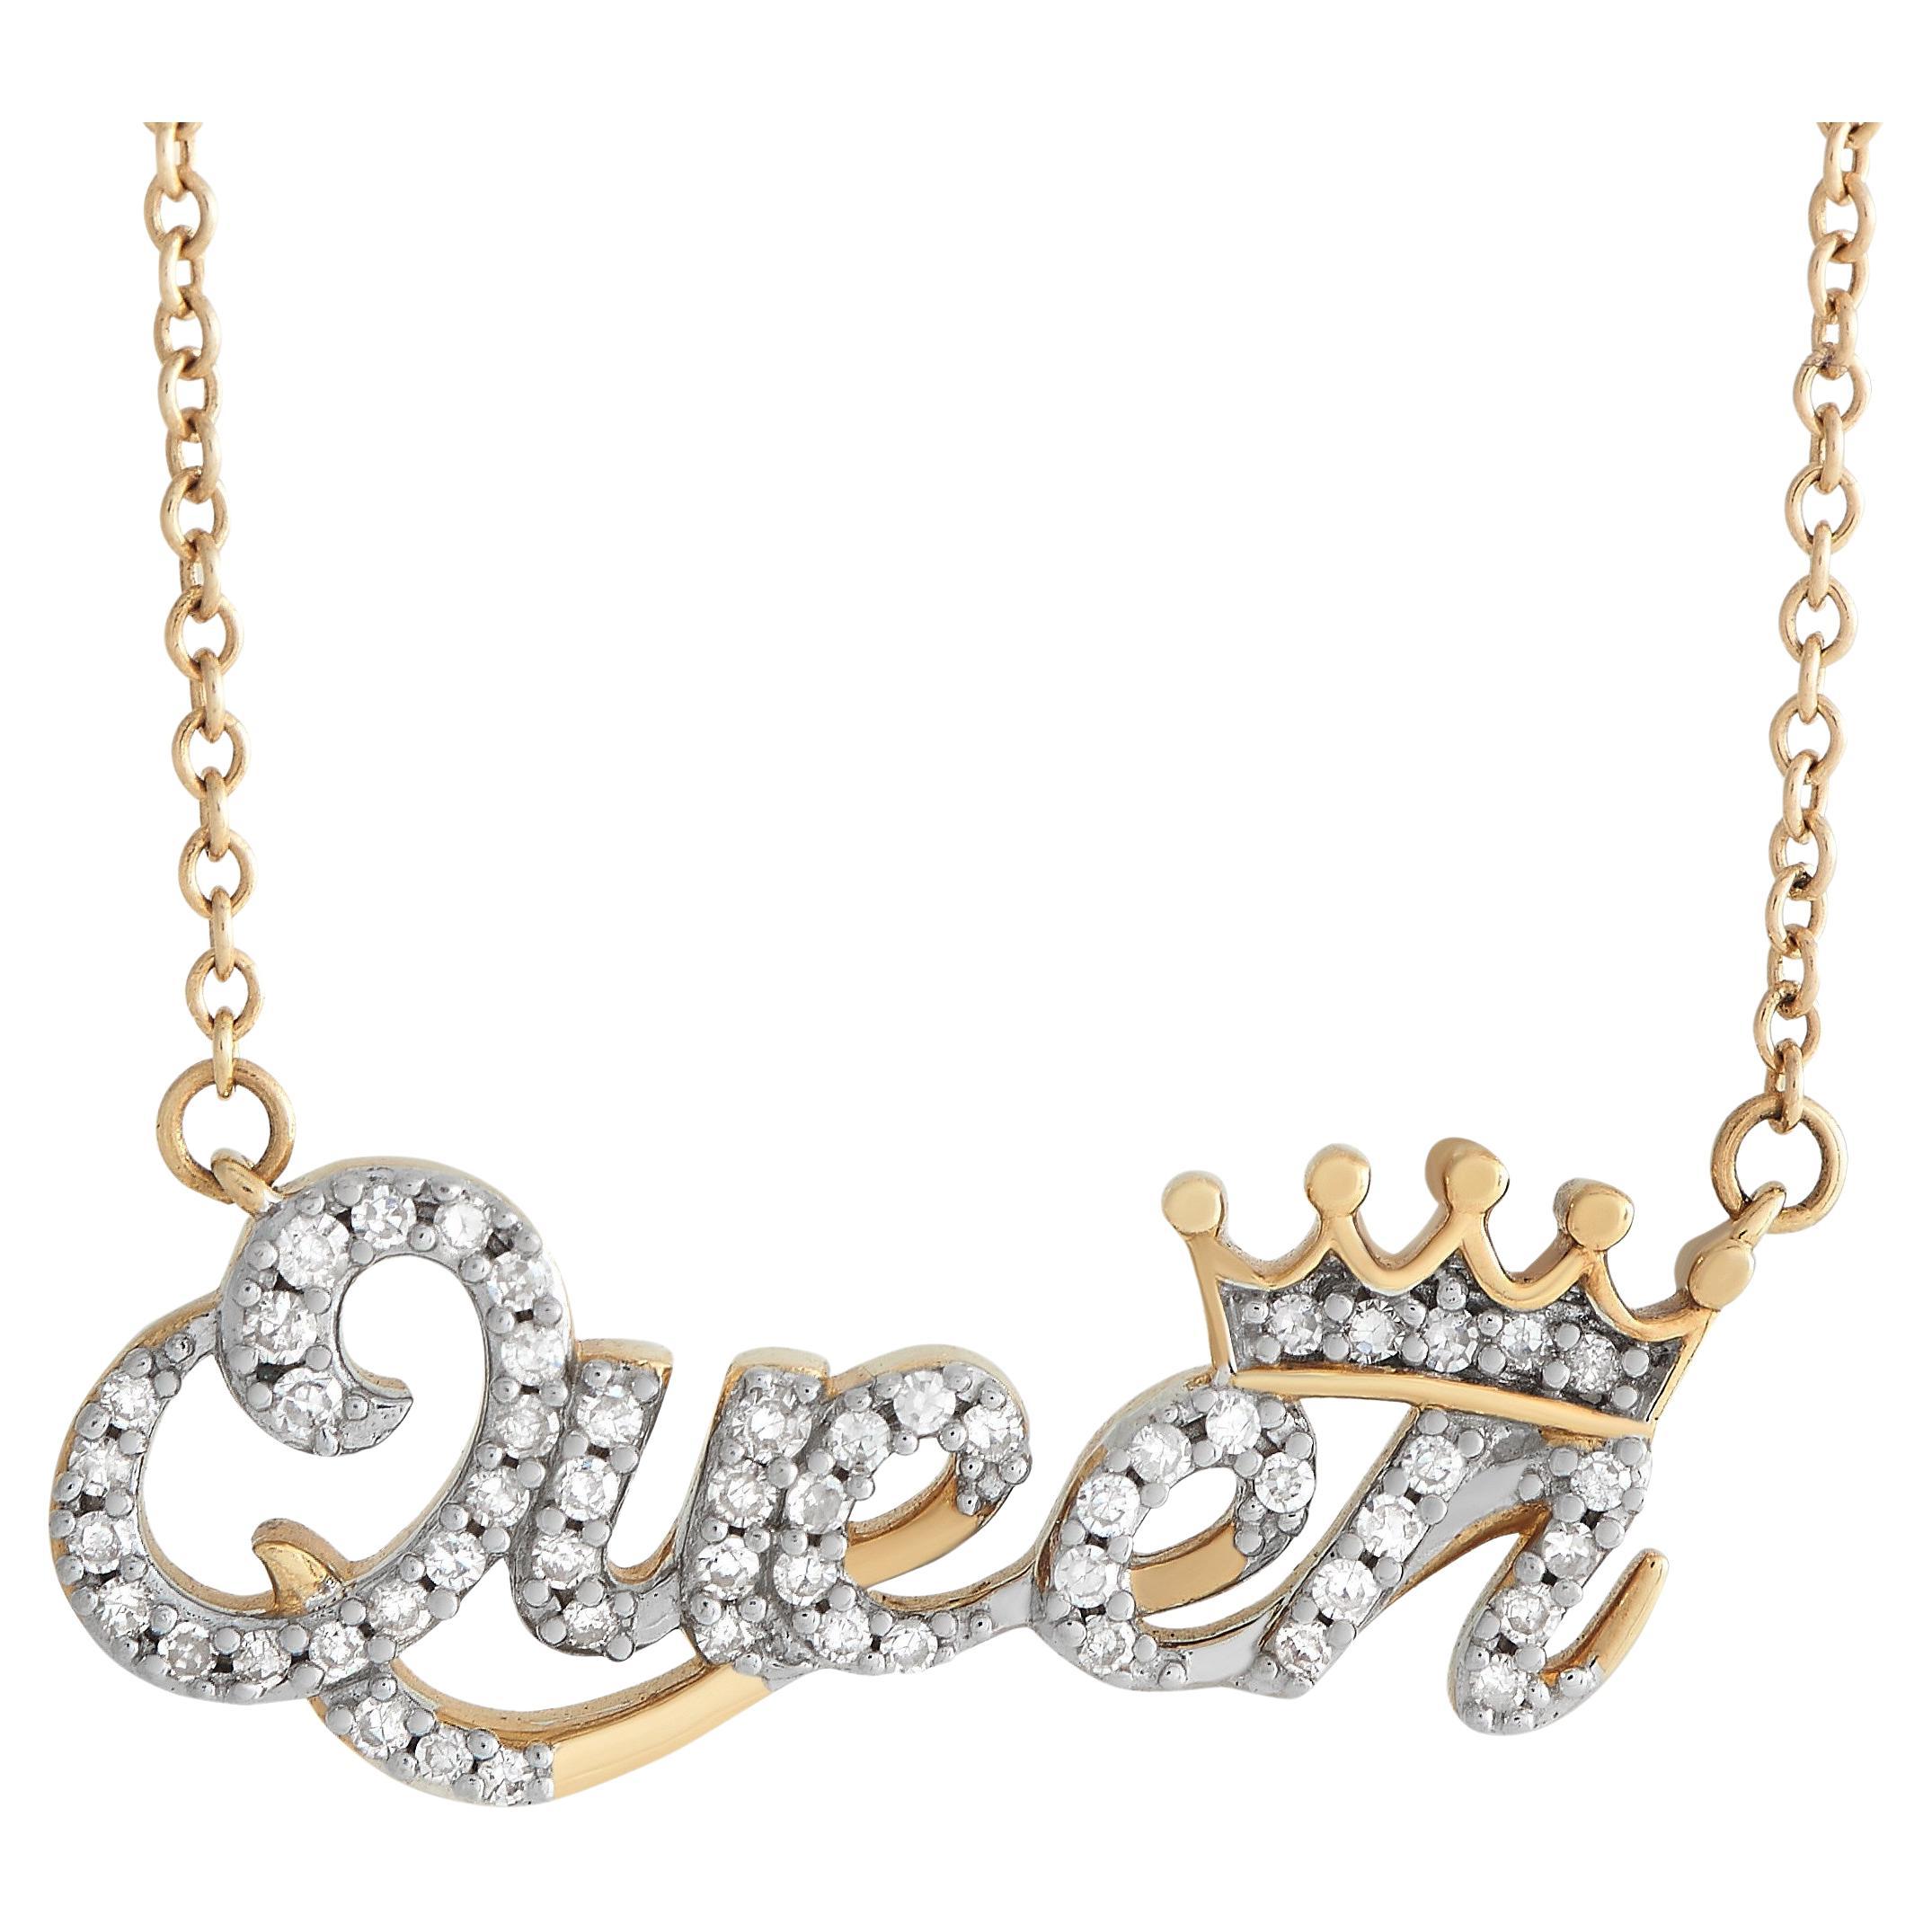 LB Exclusive 14K Yellow Gold 0.15ct Diamond Queen Necklace For Sale